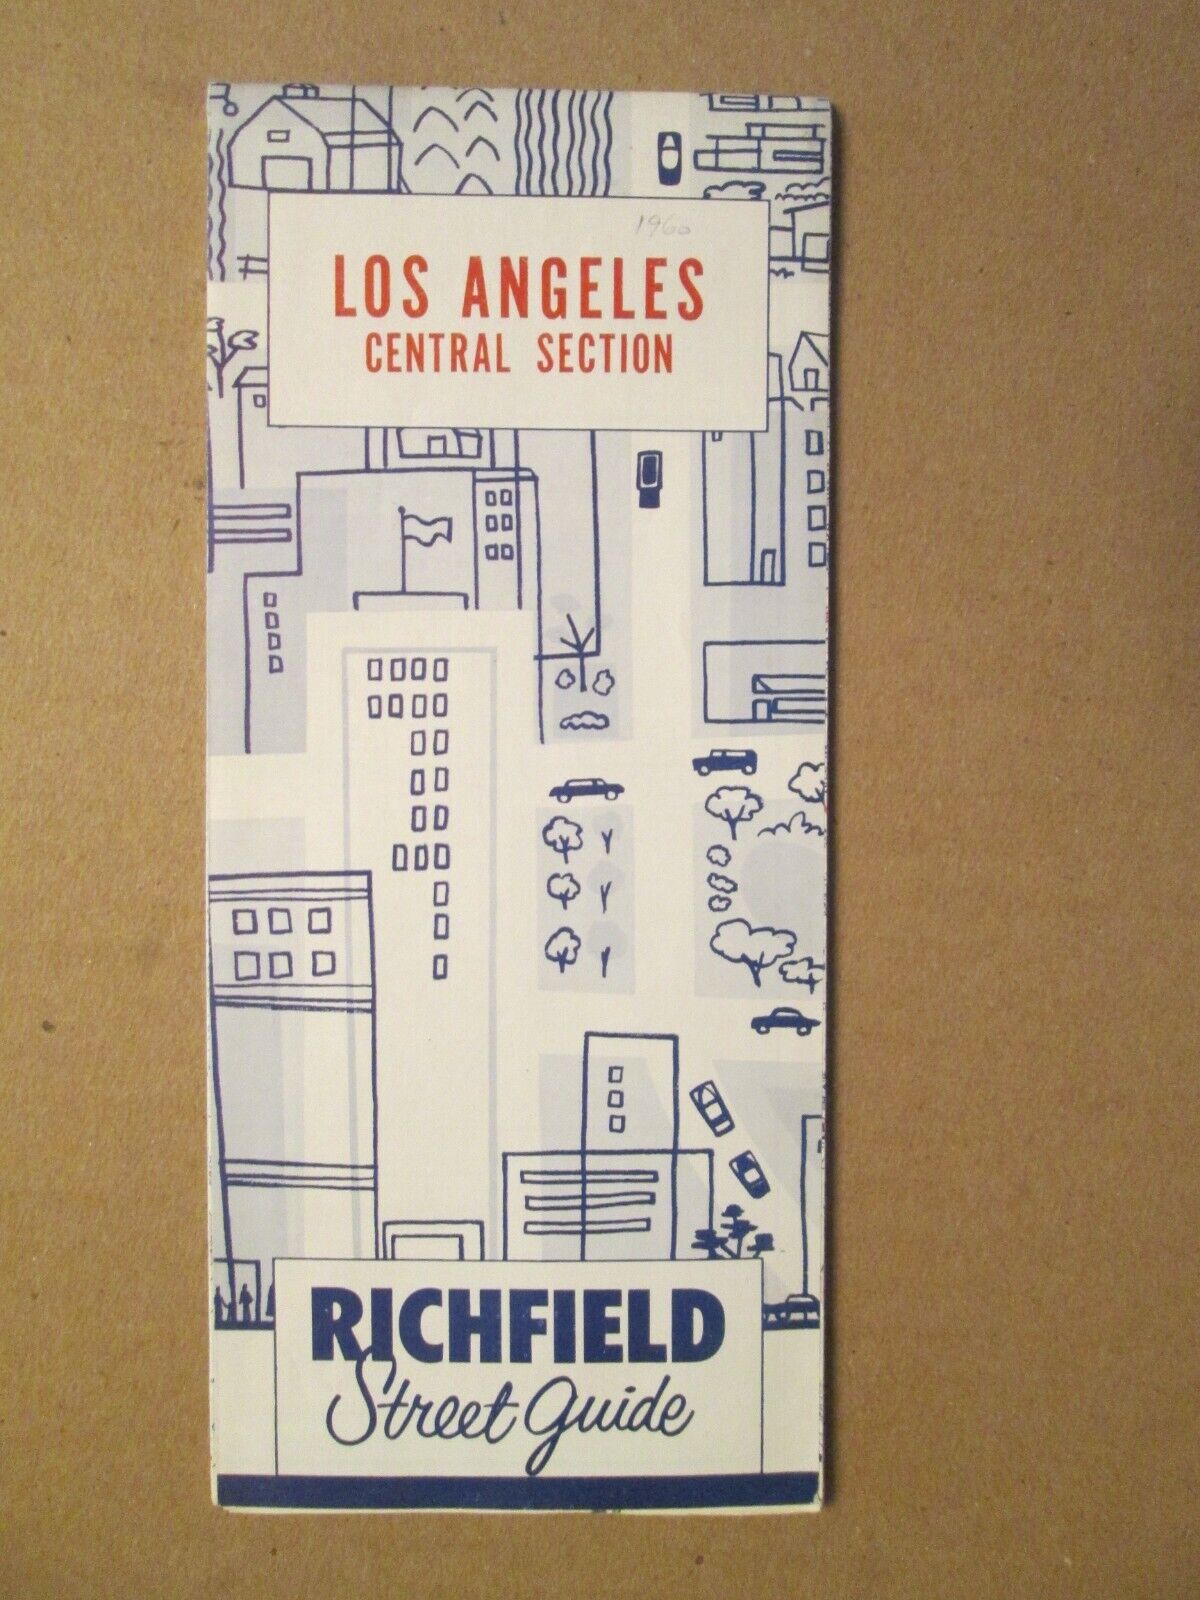 ARCO Atlantic Richfield Map of Central Section Los Angeles 1960